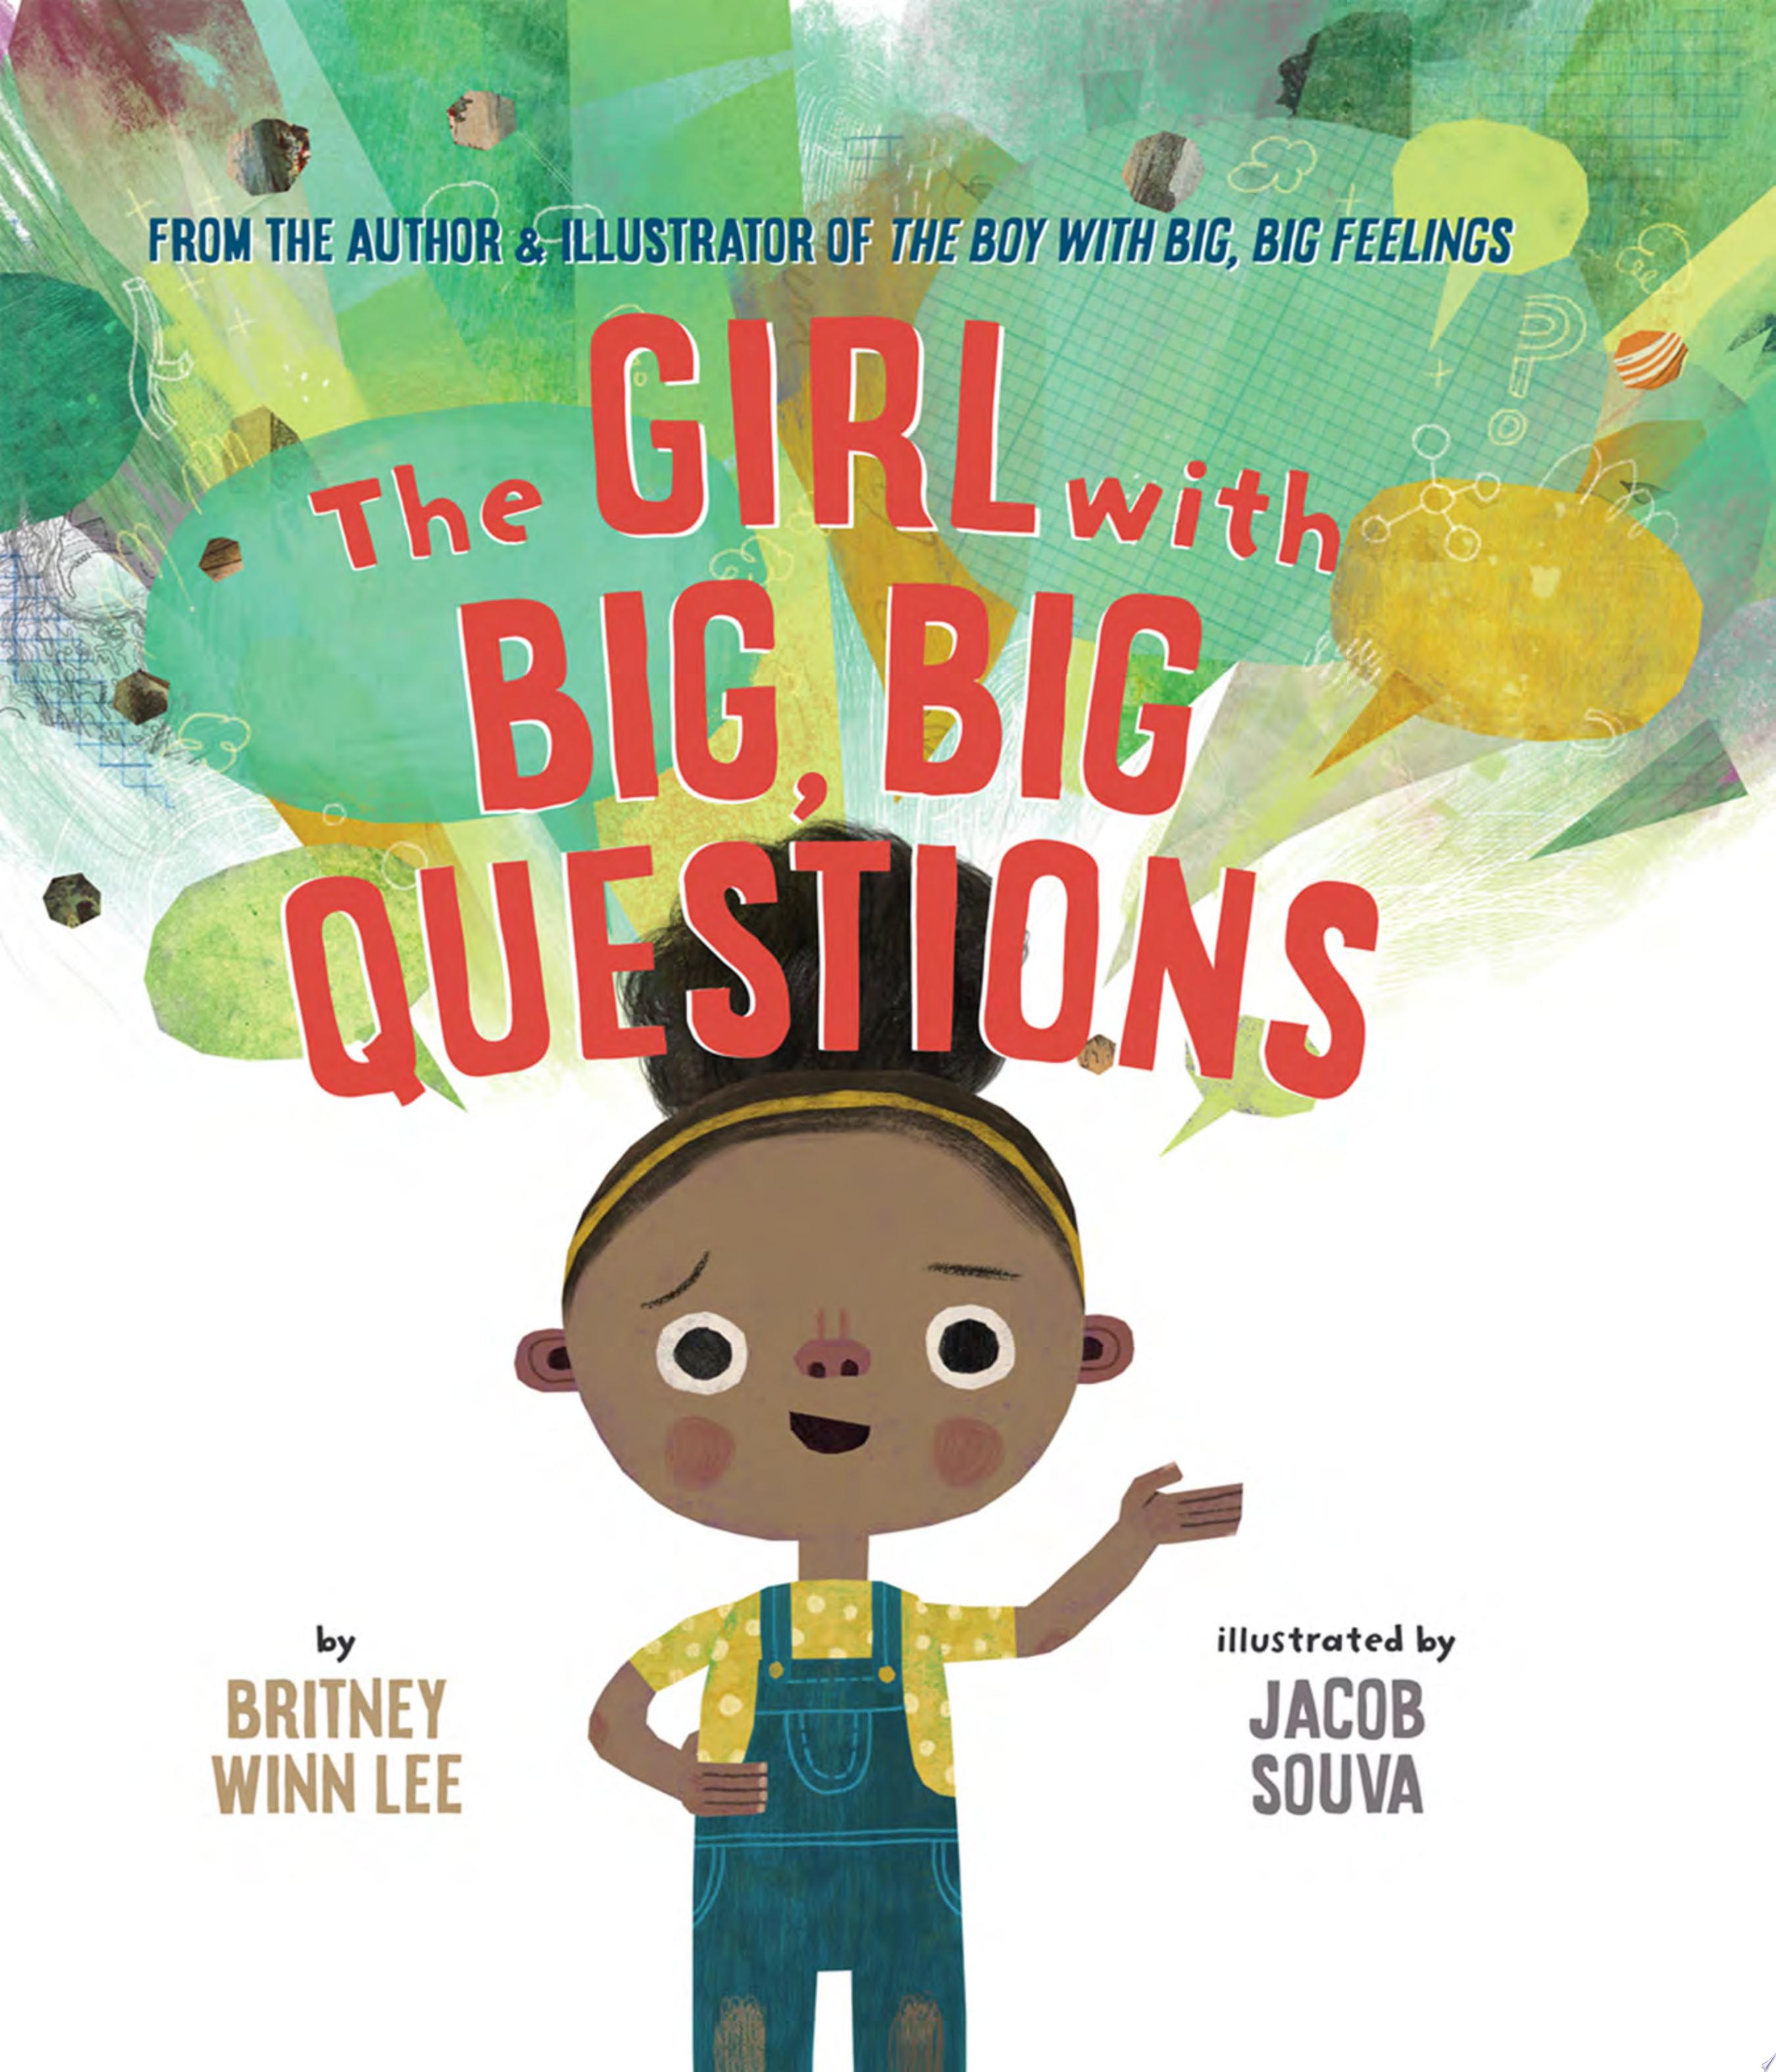 Image for "The Girl with Big, Big Questions"